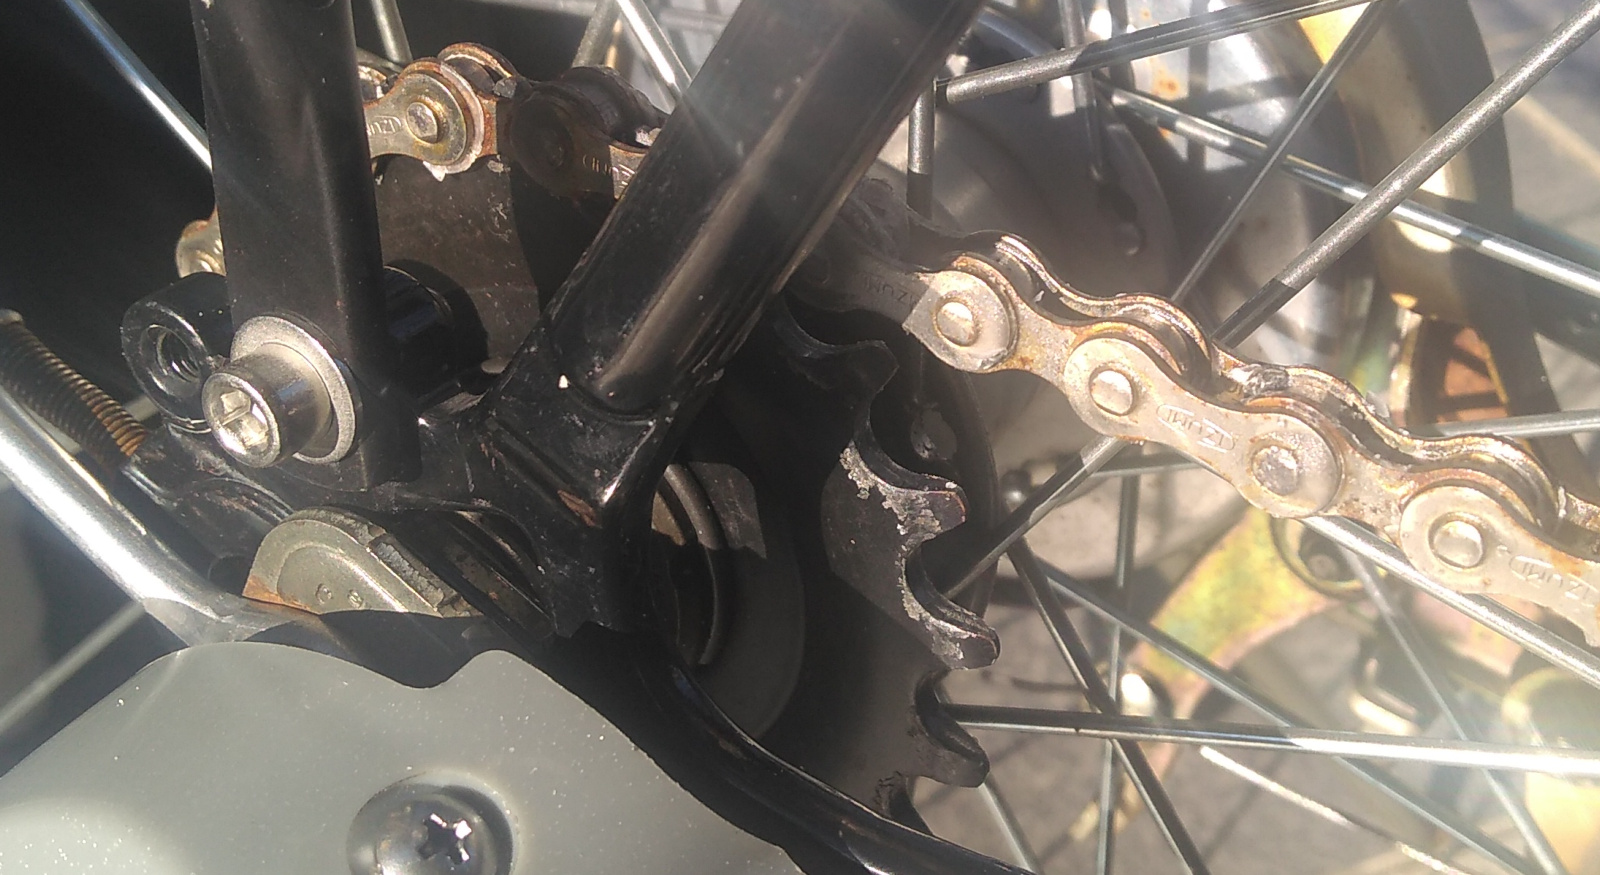 A close-up of the assembled rear sprocket, chain, gearshift mechanism and rear stays of a three-speed bicycle. The sprocket in this view has 21 teeth.